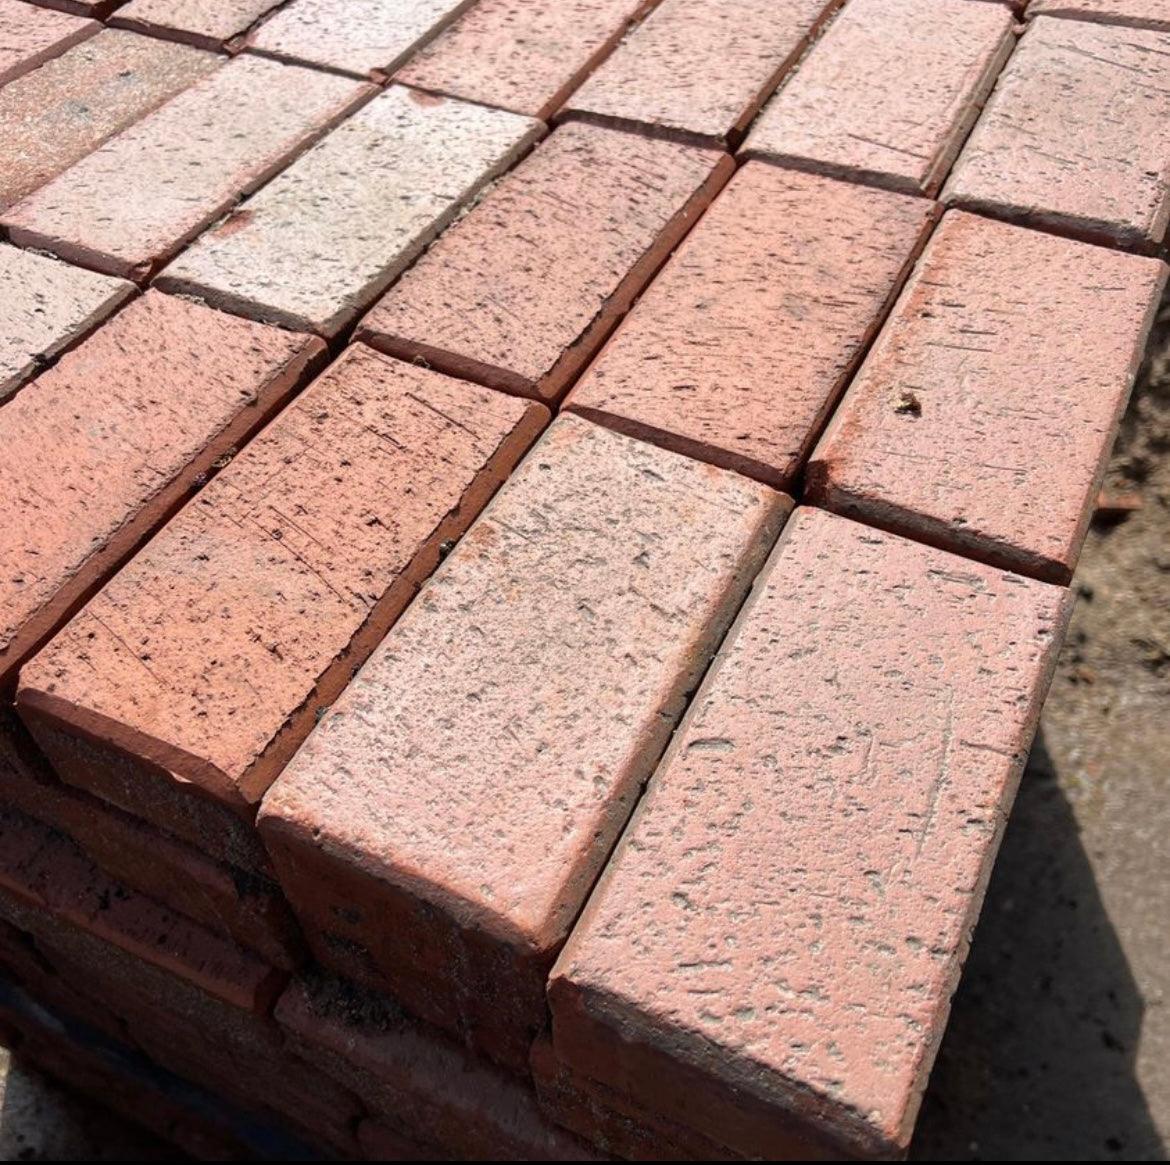 Used Red Clay Block Paving Pavers - 200mm x 100mm - Reclaimed Brick Company